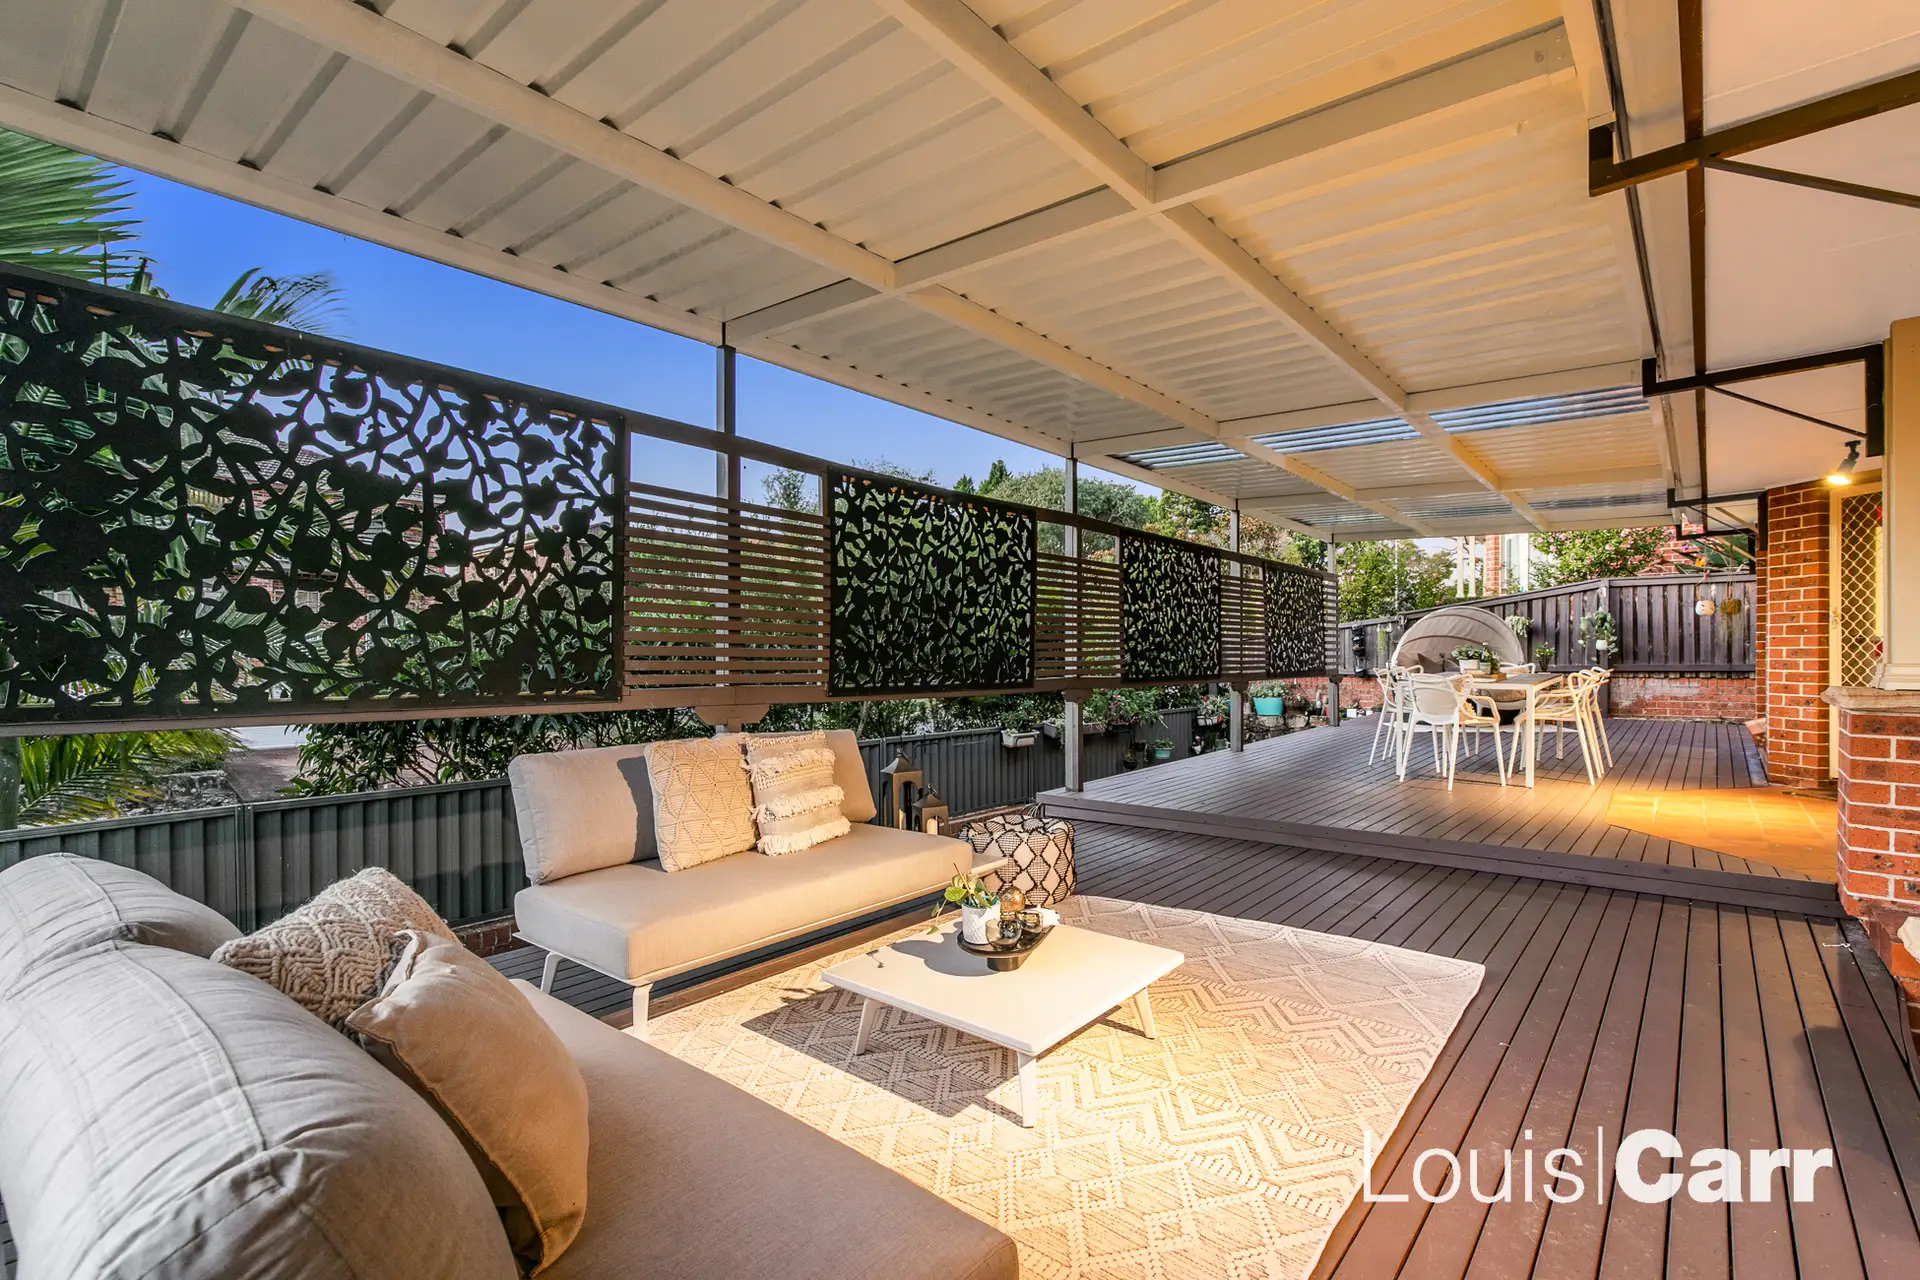 Photo #2: 18 Farrer Avenue, West Pennant Hills - Sold by Louis Carr Real Estate